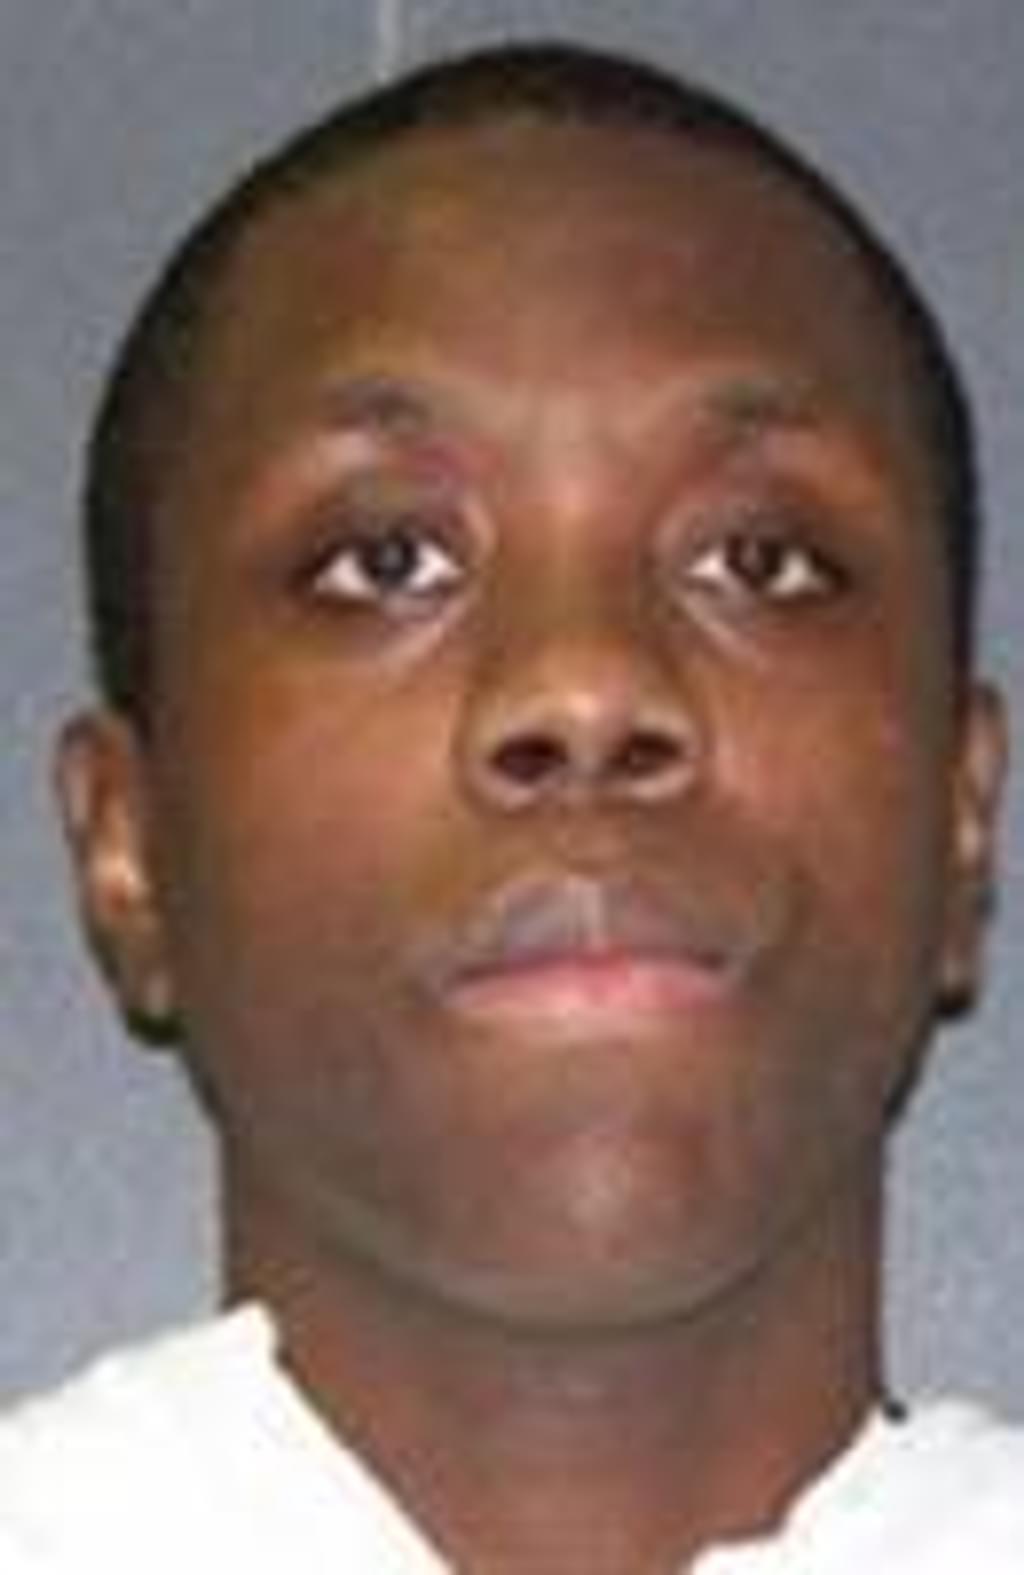 Texas Inmate Faces Execution After Appeals Lawyers Abandon His Case